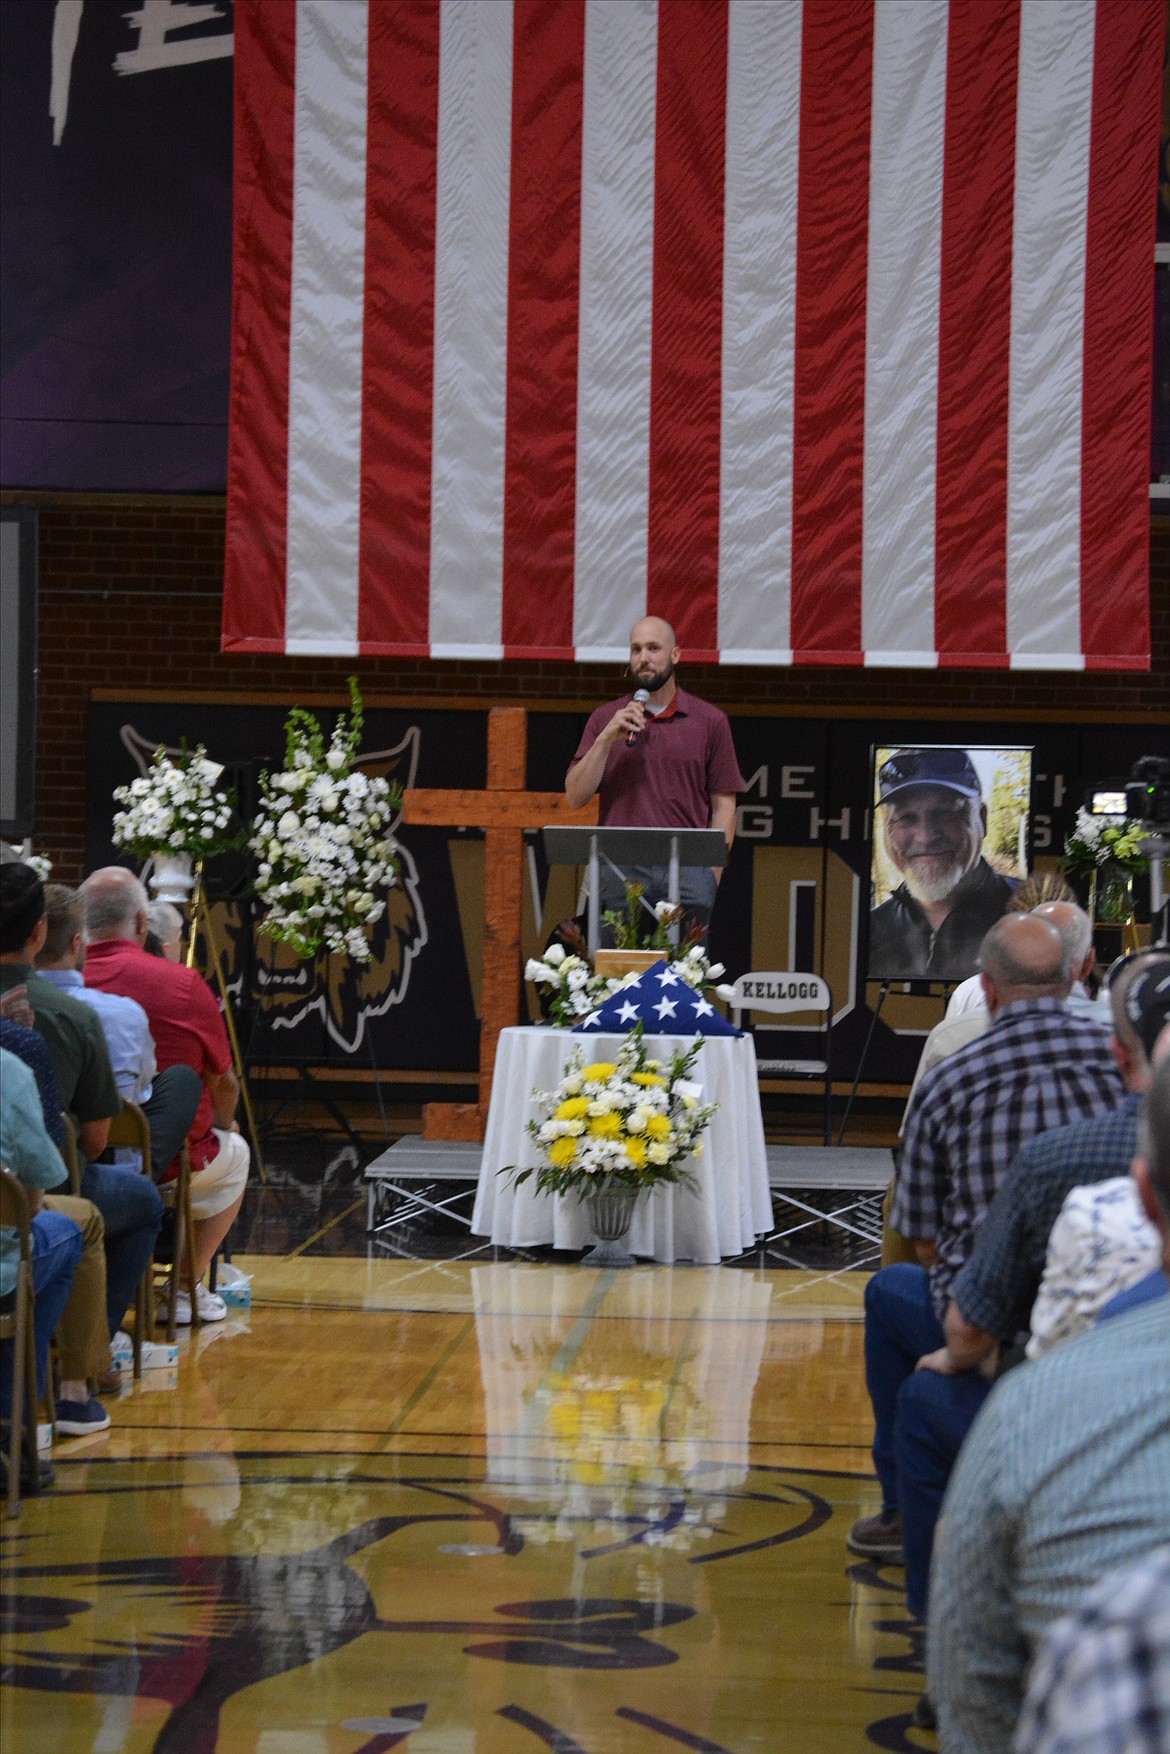 Kevin Kessler of Real Life Ministries addresses those gathered for the celebration of life for Gene Jacobs at Kellogg High School Saturday.